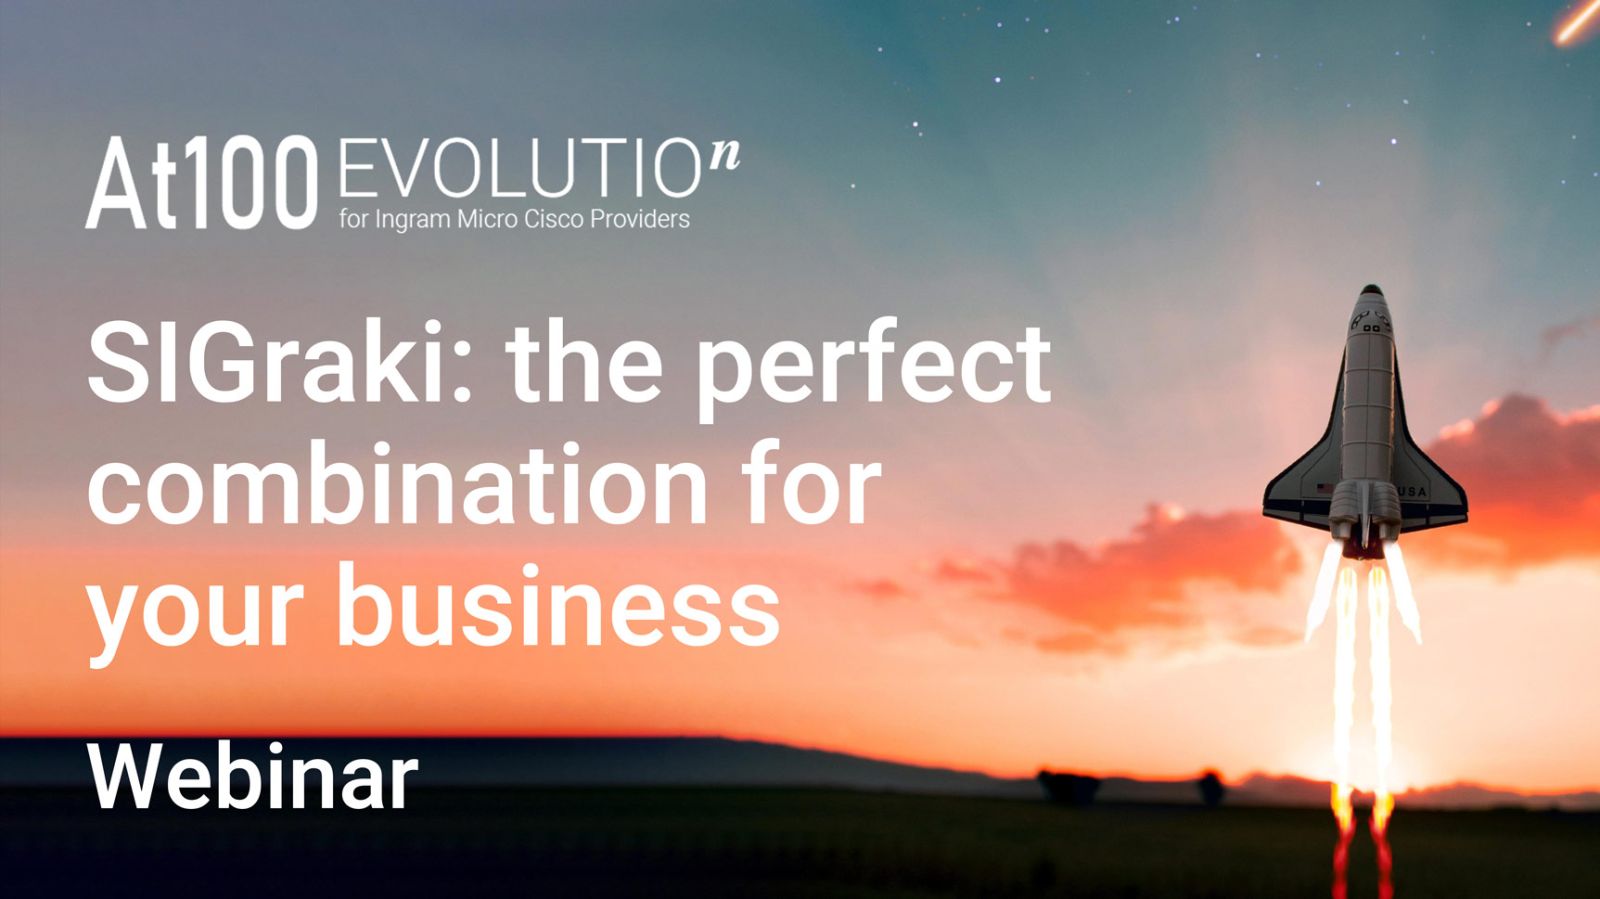 ON DEMAND - SIGraki, the perfect combination for your business Featured Image